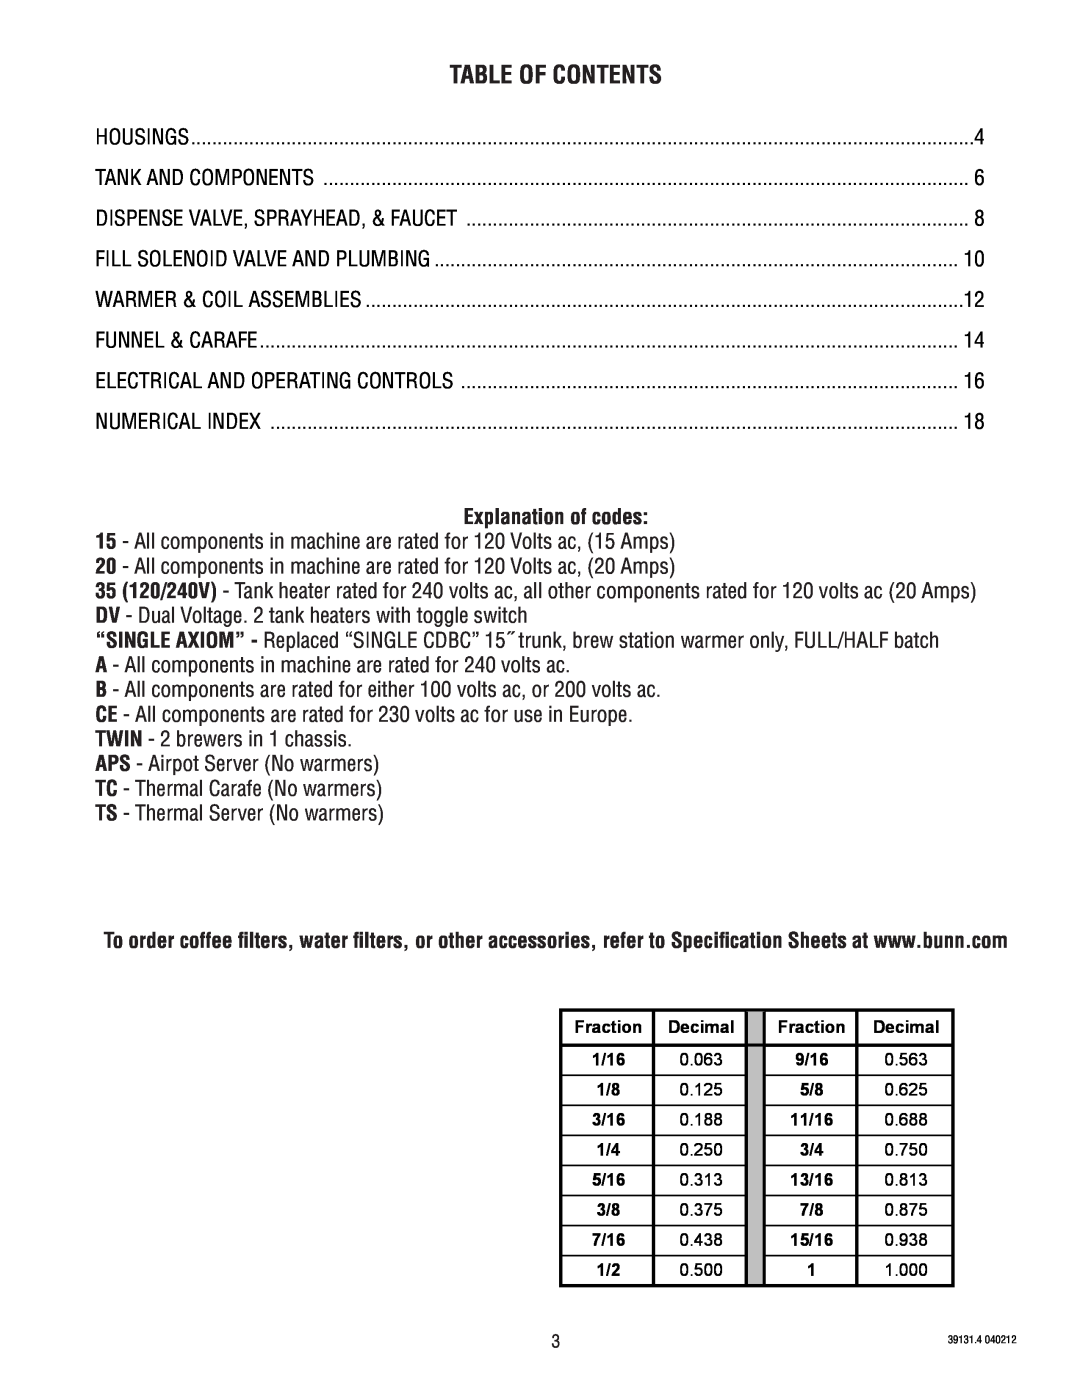 Bunn 39131.0004B specifications Table Of Contents, Explanation of codes 